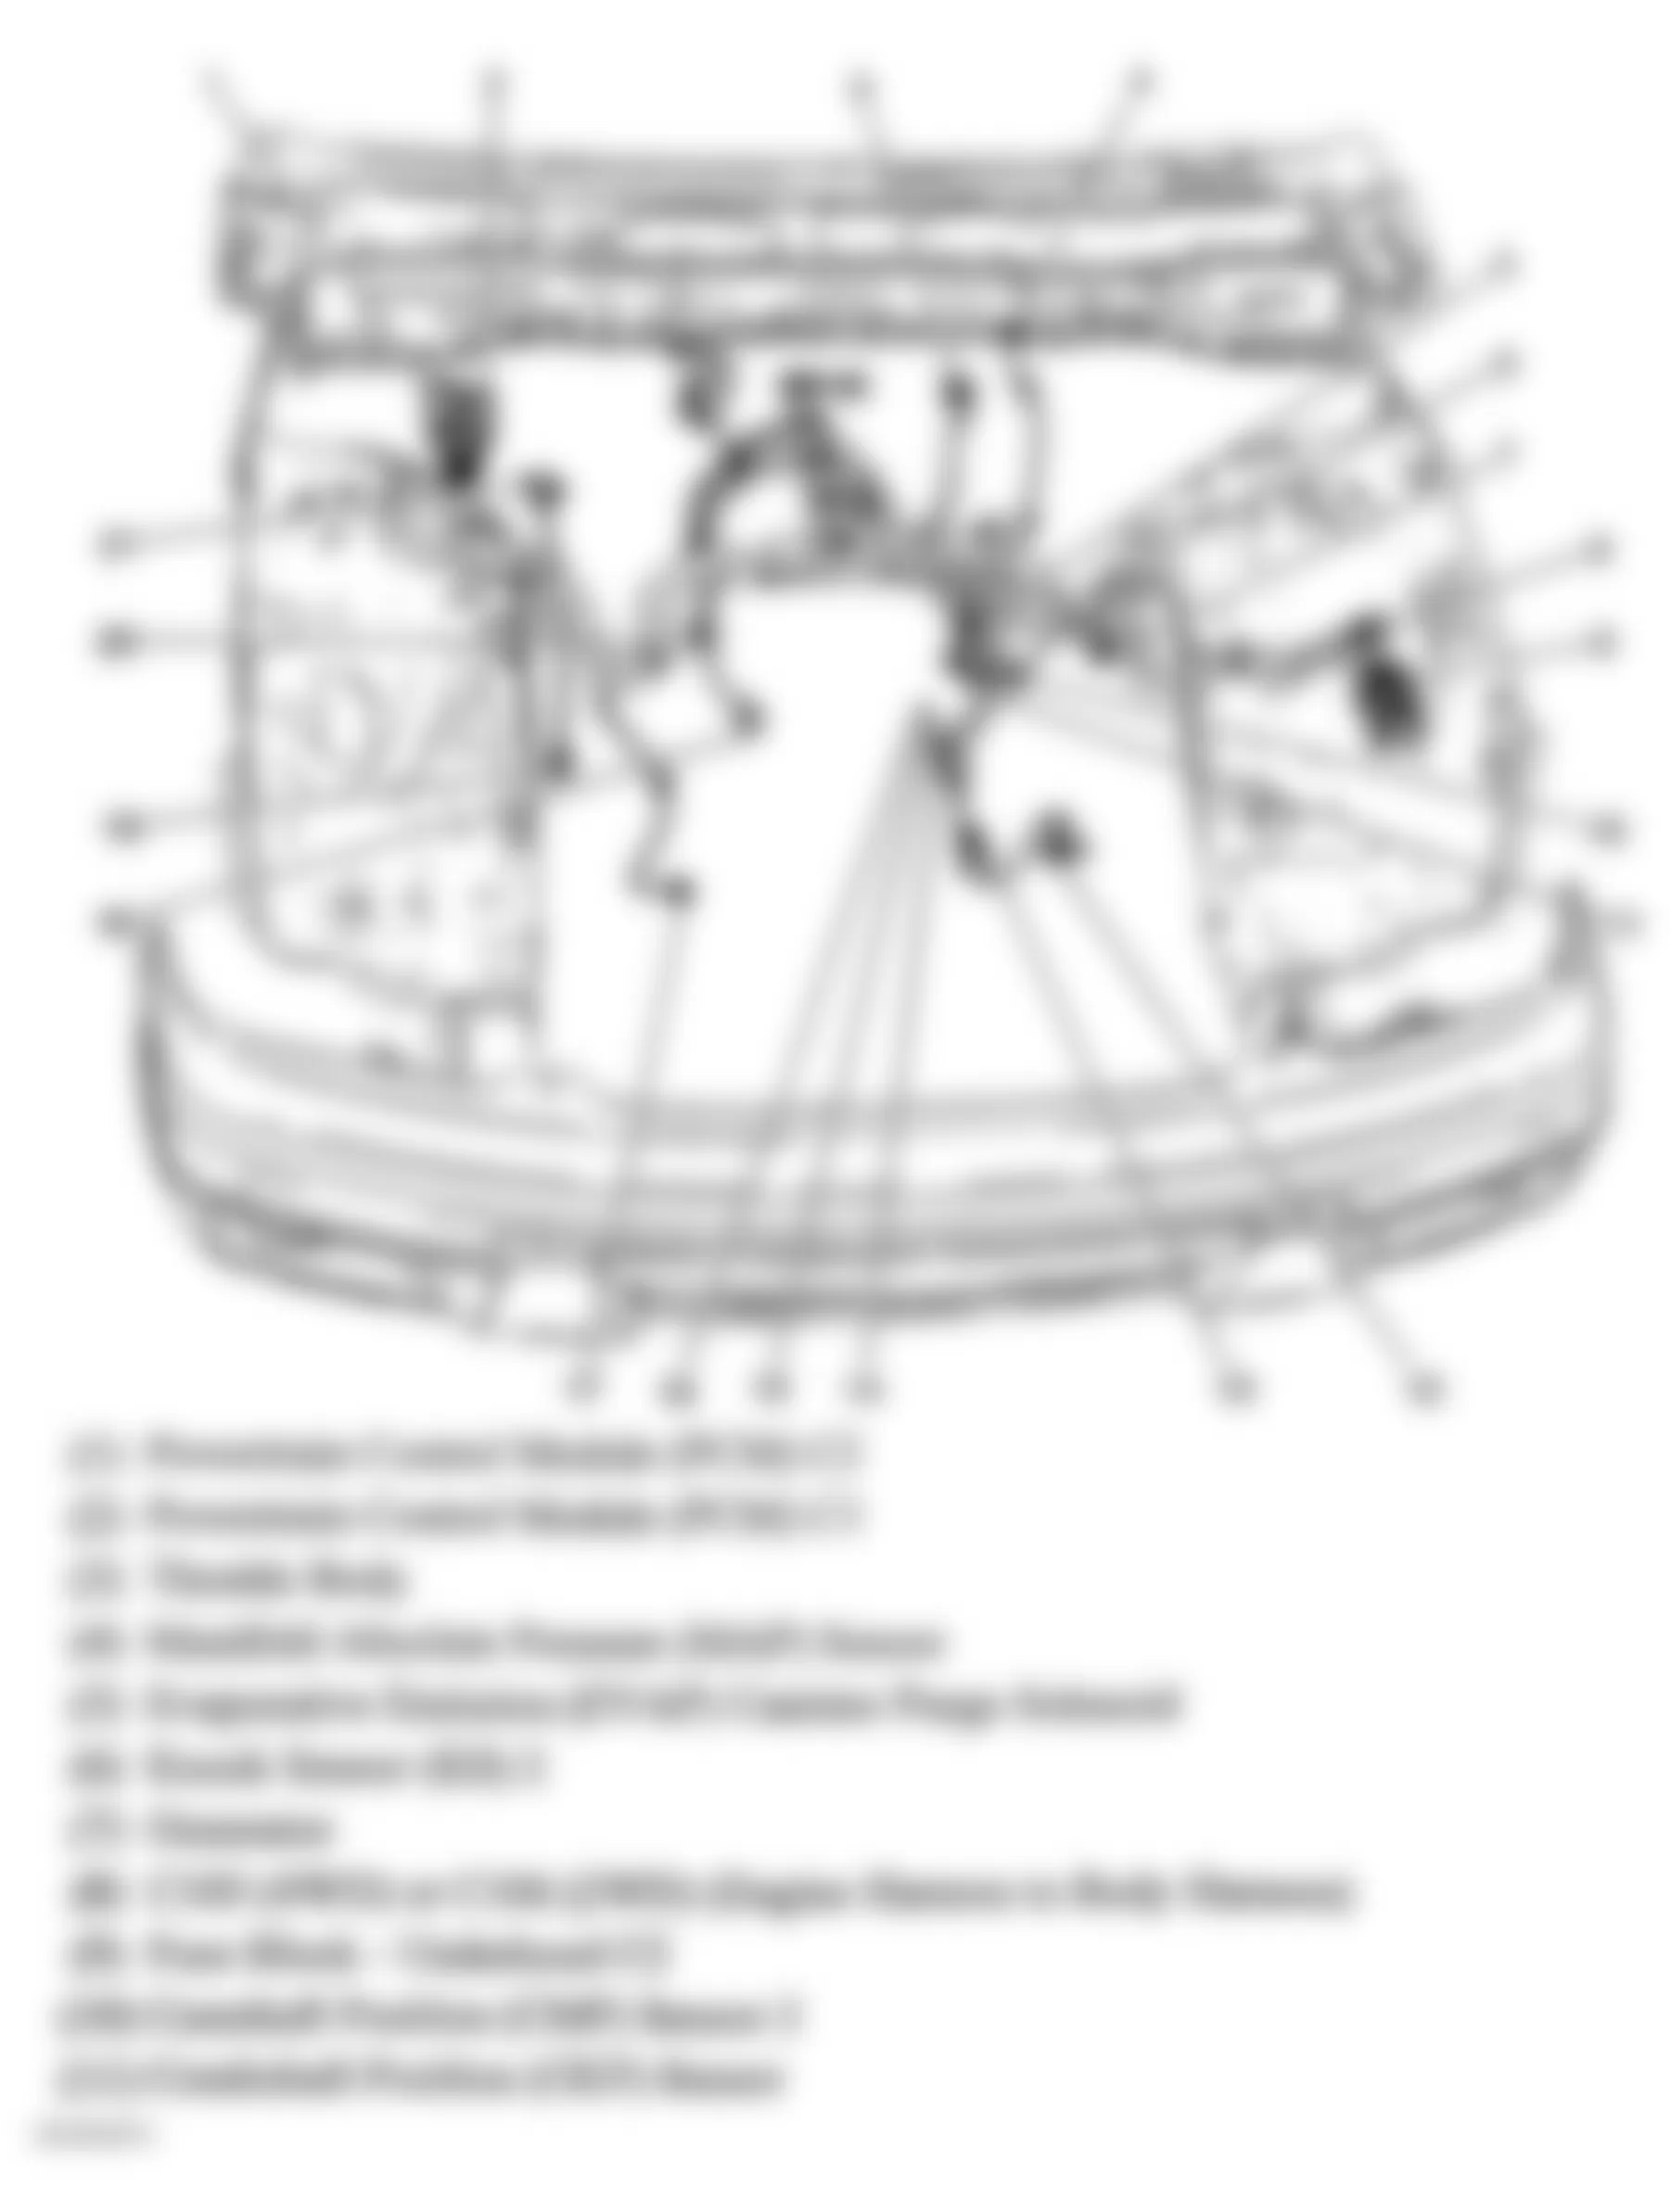 GMC Canyon 2005 - Component Locations -  Left Side Of Engine (3.5L) (1 Of 2)